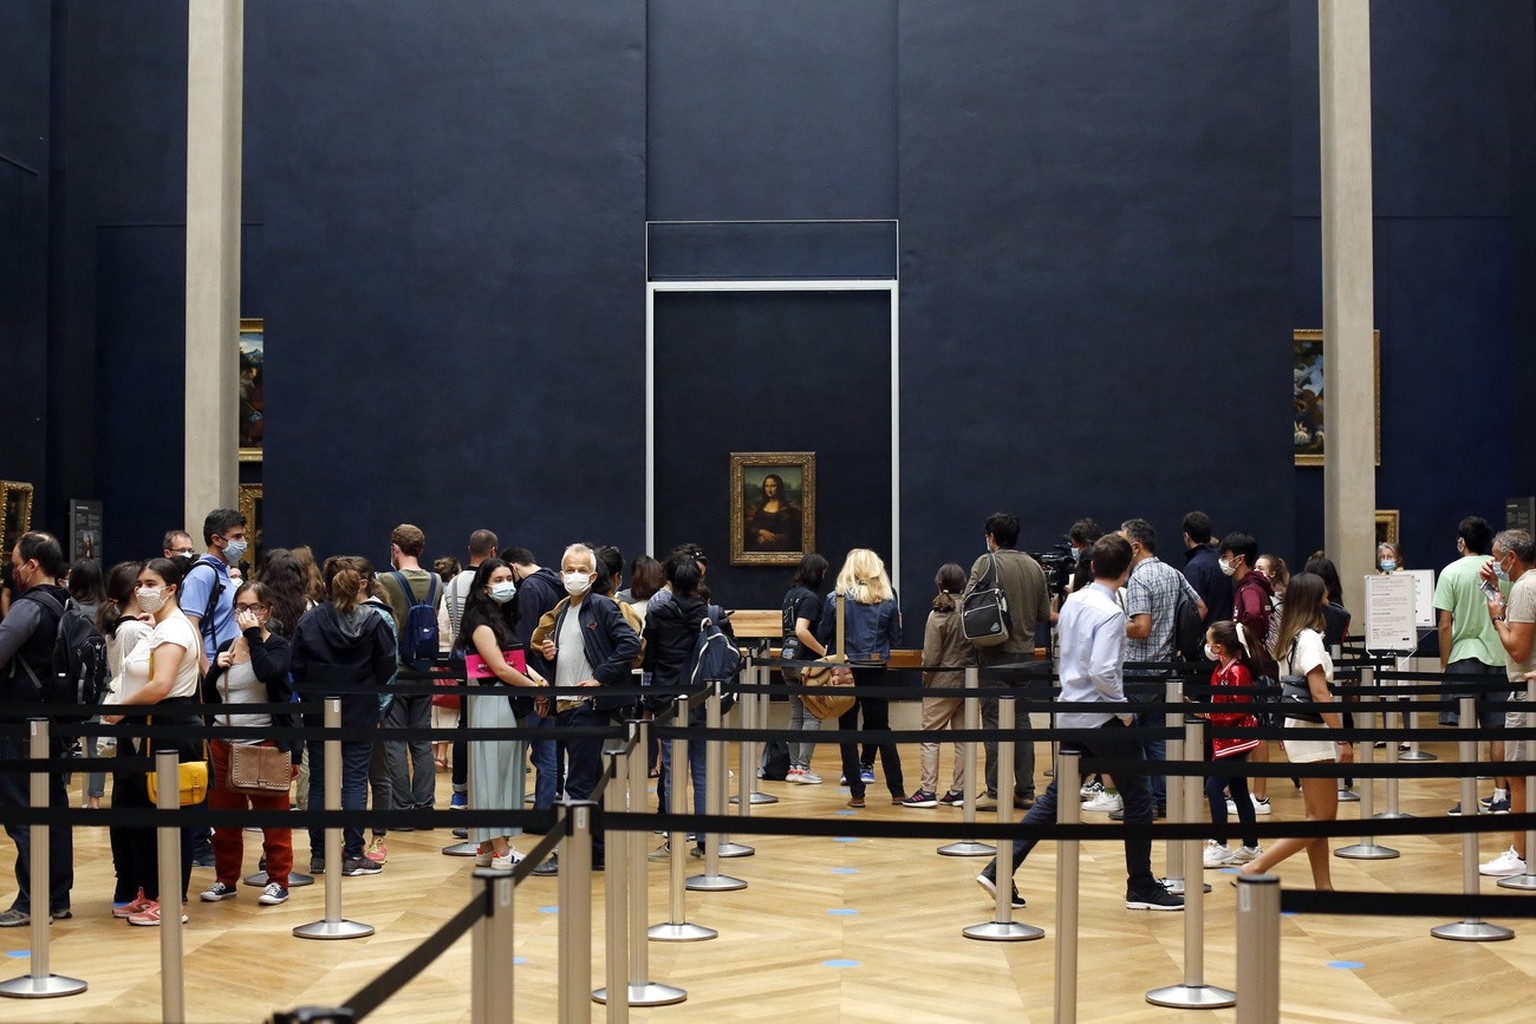 Visitors wait to see the Leonardo da Vinci&amp;#039;s painting Mona Lisa, in Paris, Monday, July 6, 2020. The home of the world&amp;#039;s most famous portrait, the Louvre Museum in Paris, reopened Mo ...